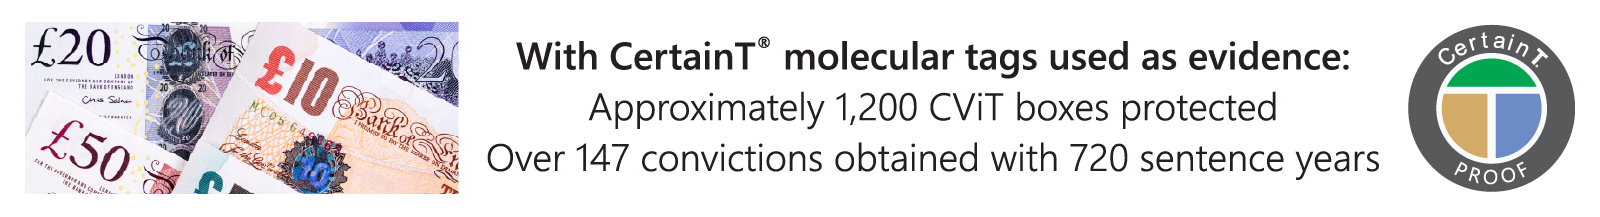 With CertainT® molecular tags used as evidence:
Approximately 1,200 CViT boxes protected
Over 147 convictions obtained with 720 sentence years